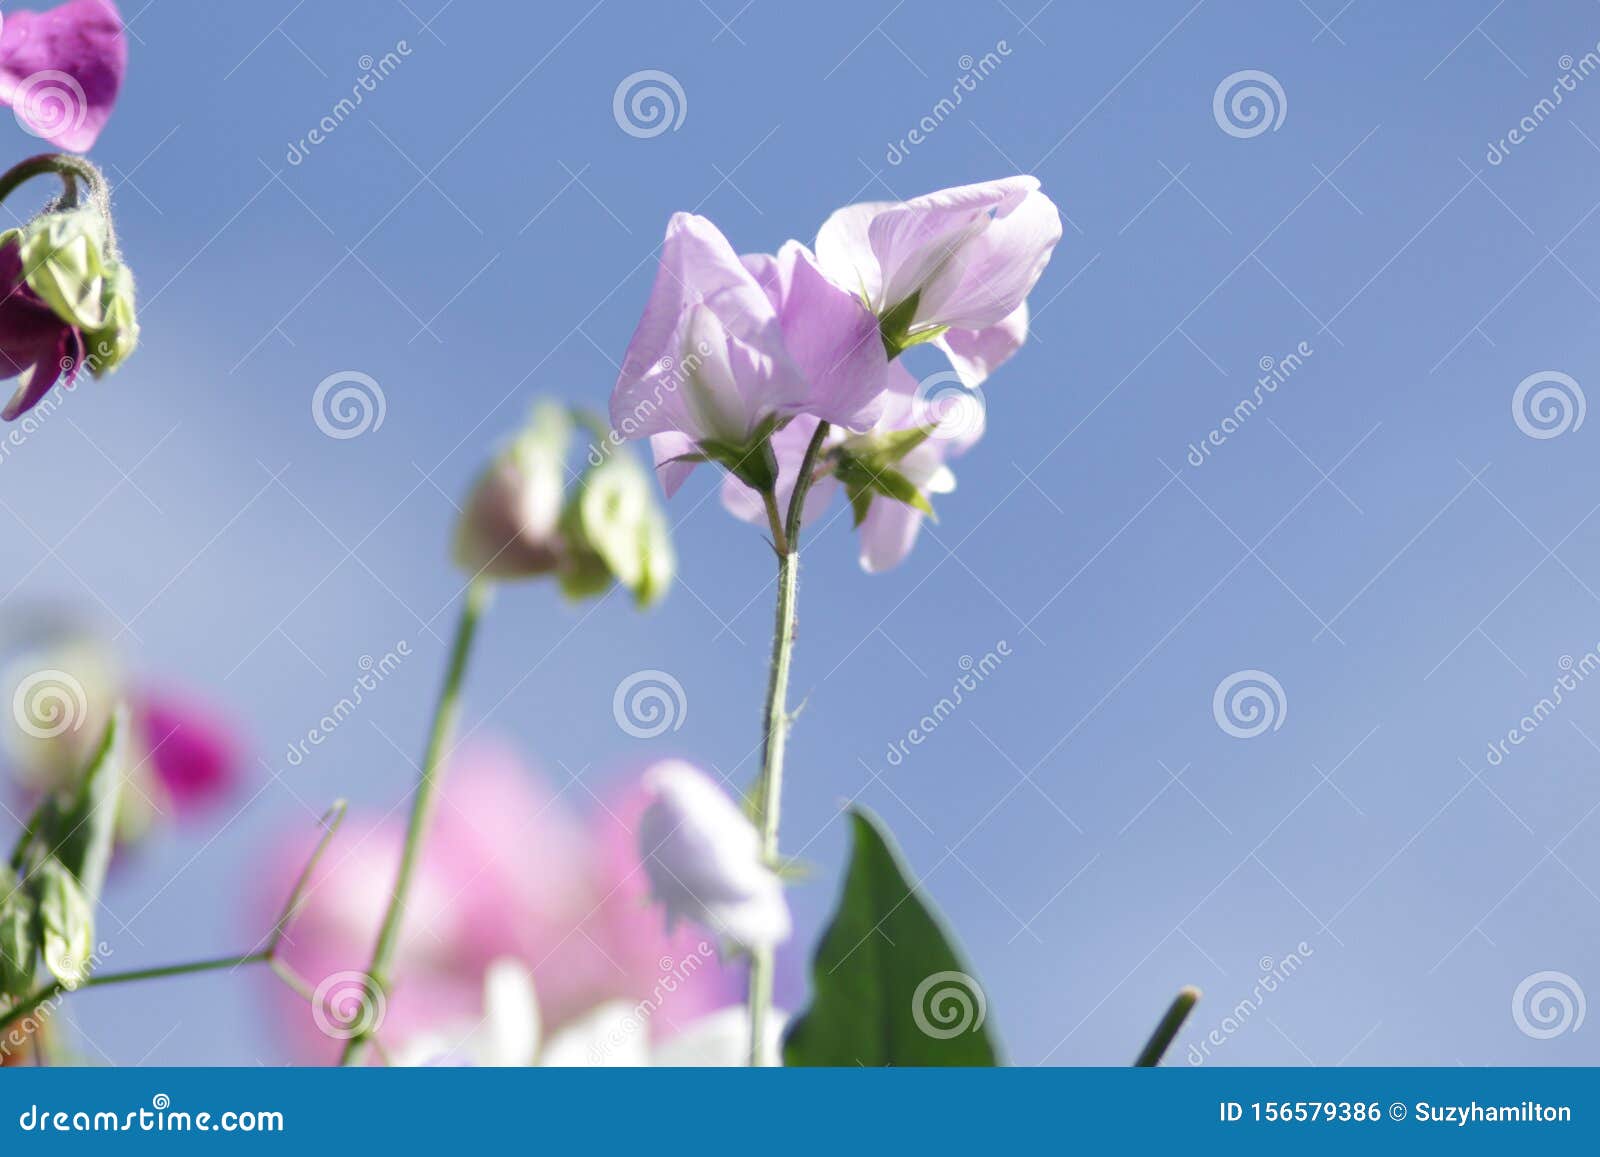 Sweet Pea Flowers Pastel Colours With Blue Sky Background Stock Photo Image Of White Pastel 156579386